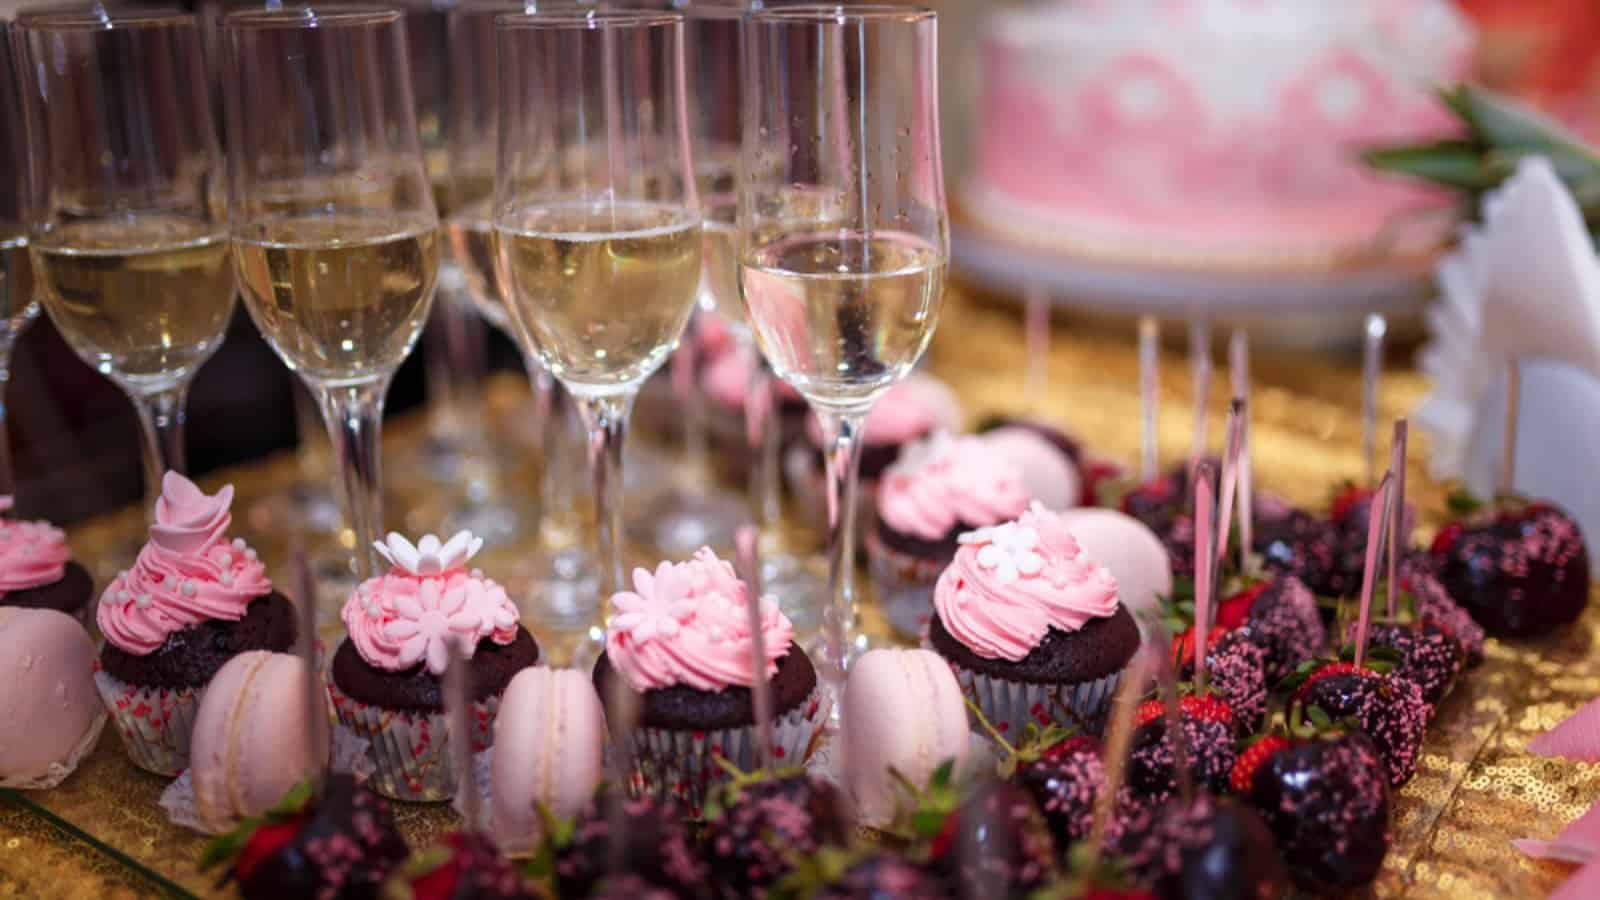 Cupcakes and champagne glasses on table